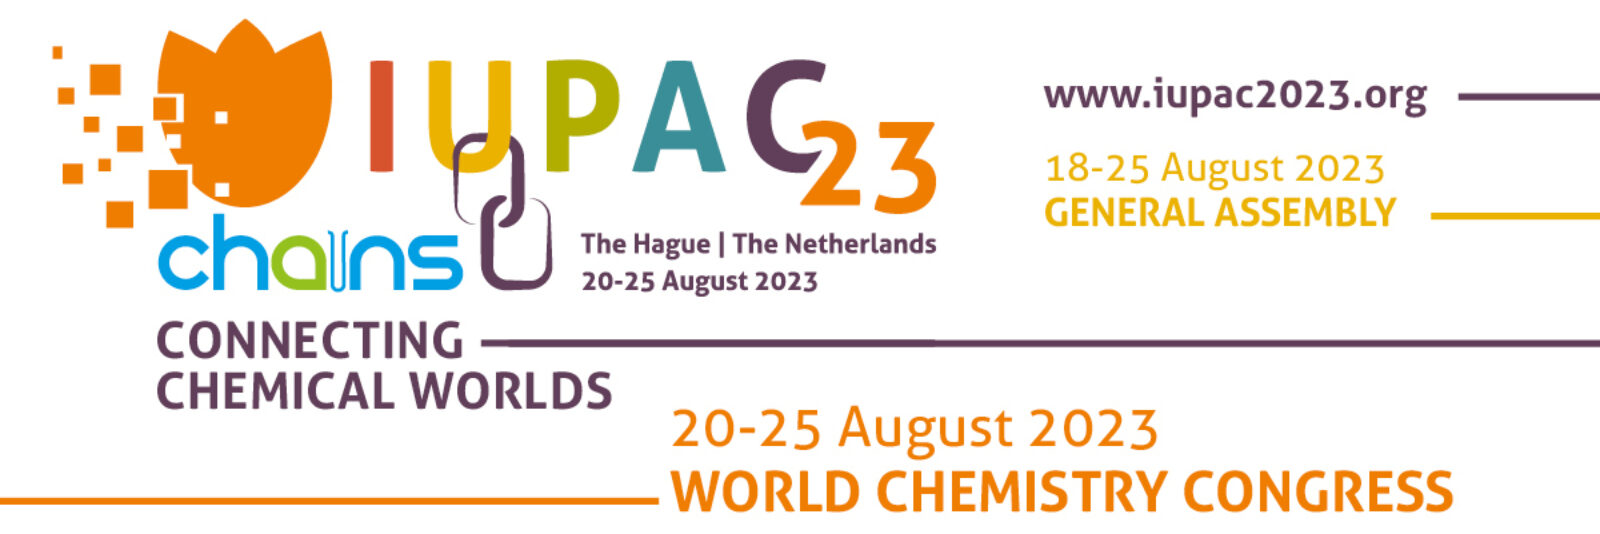 Banner Linked In IUPAC 1200x627